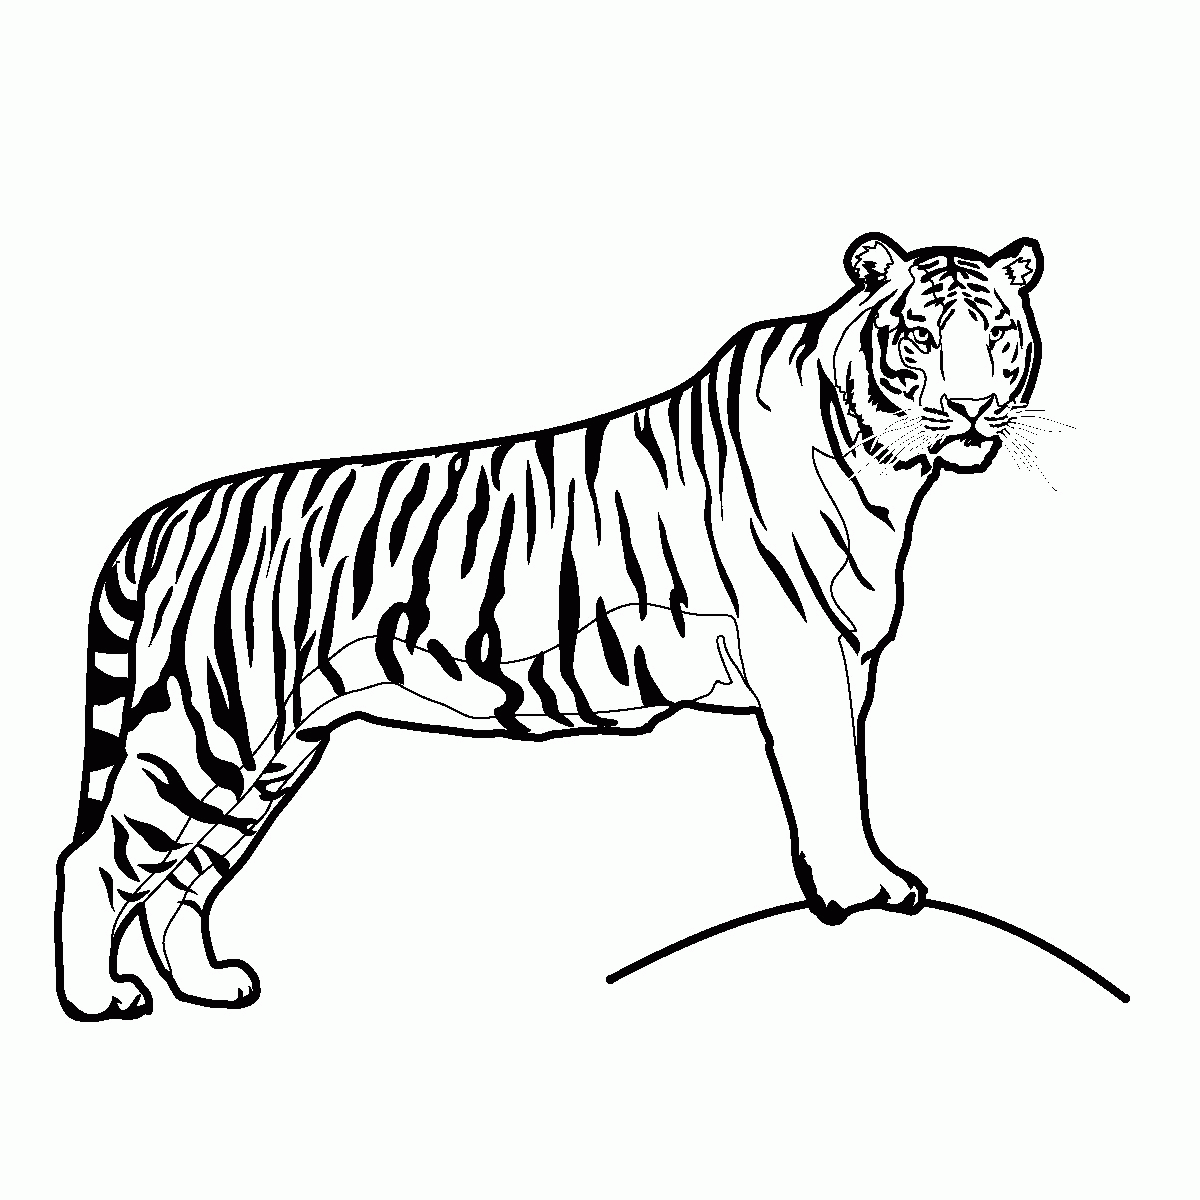 tiger-coloring-page-0010-q1